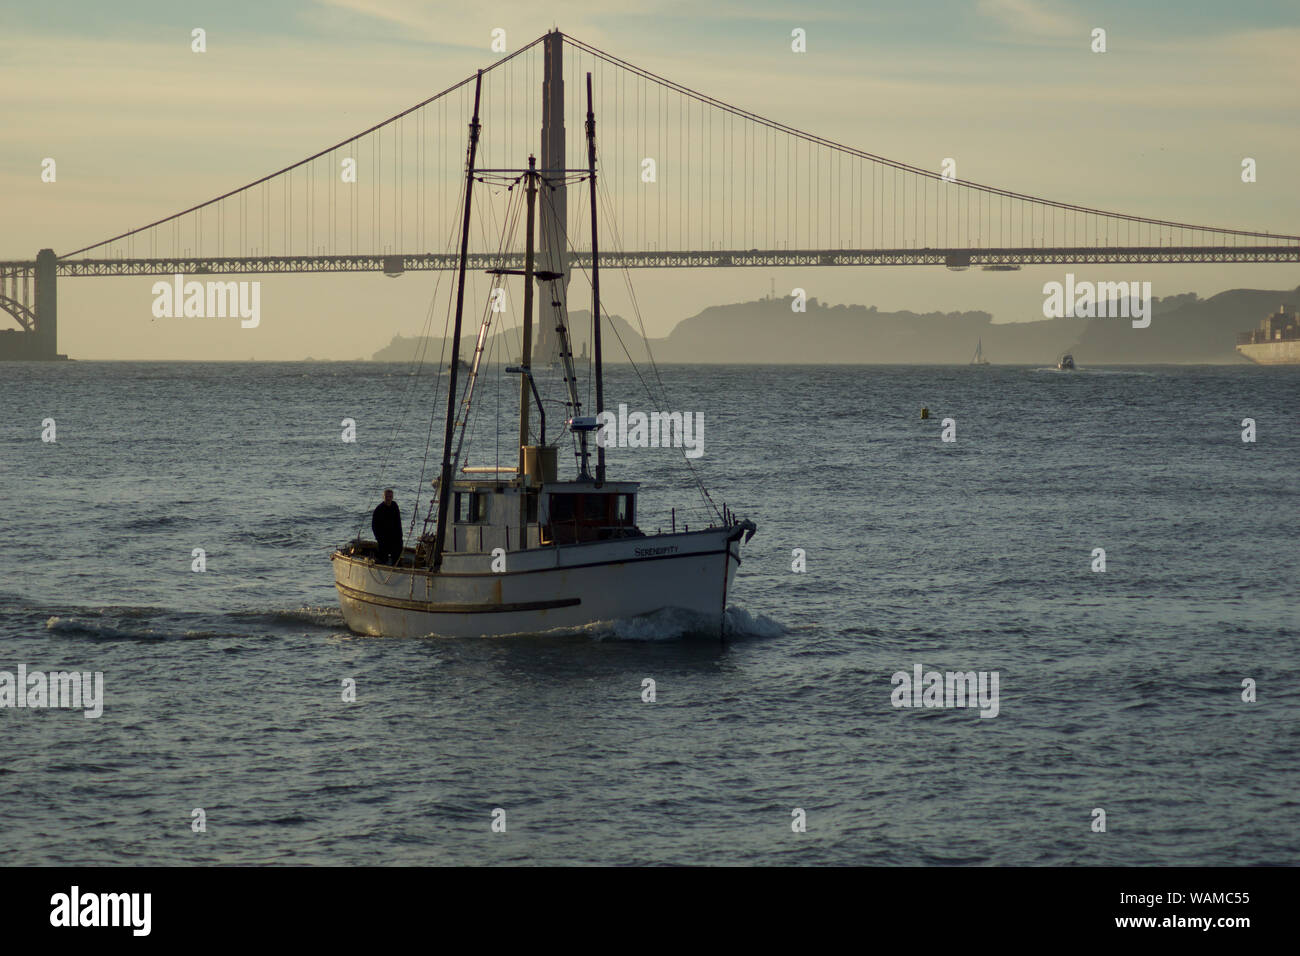 SAN FRANCISCO, CALIFORNIA, UNITED STATES - NOV 25th, 2018: Boat in San Francisco Bay with Golden Gate Bridge in the background during sunset Stock Photo